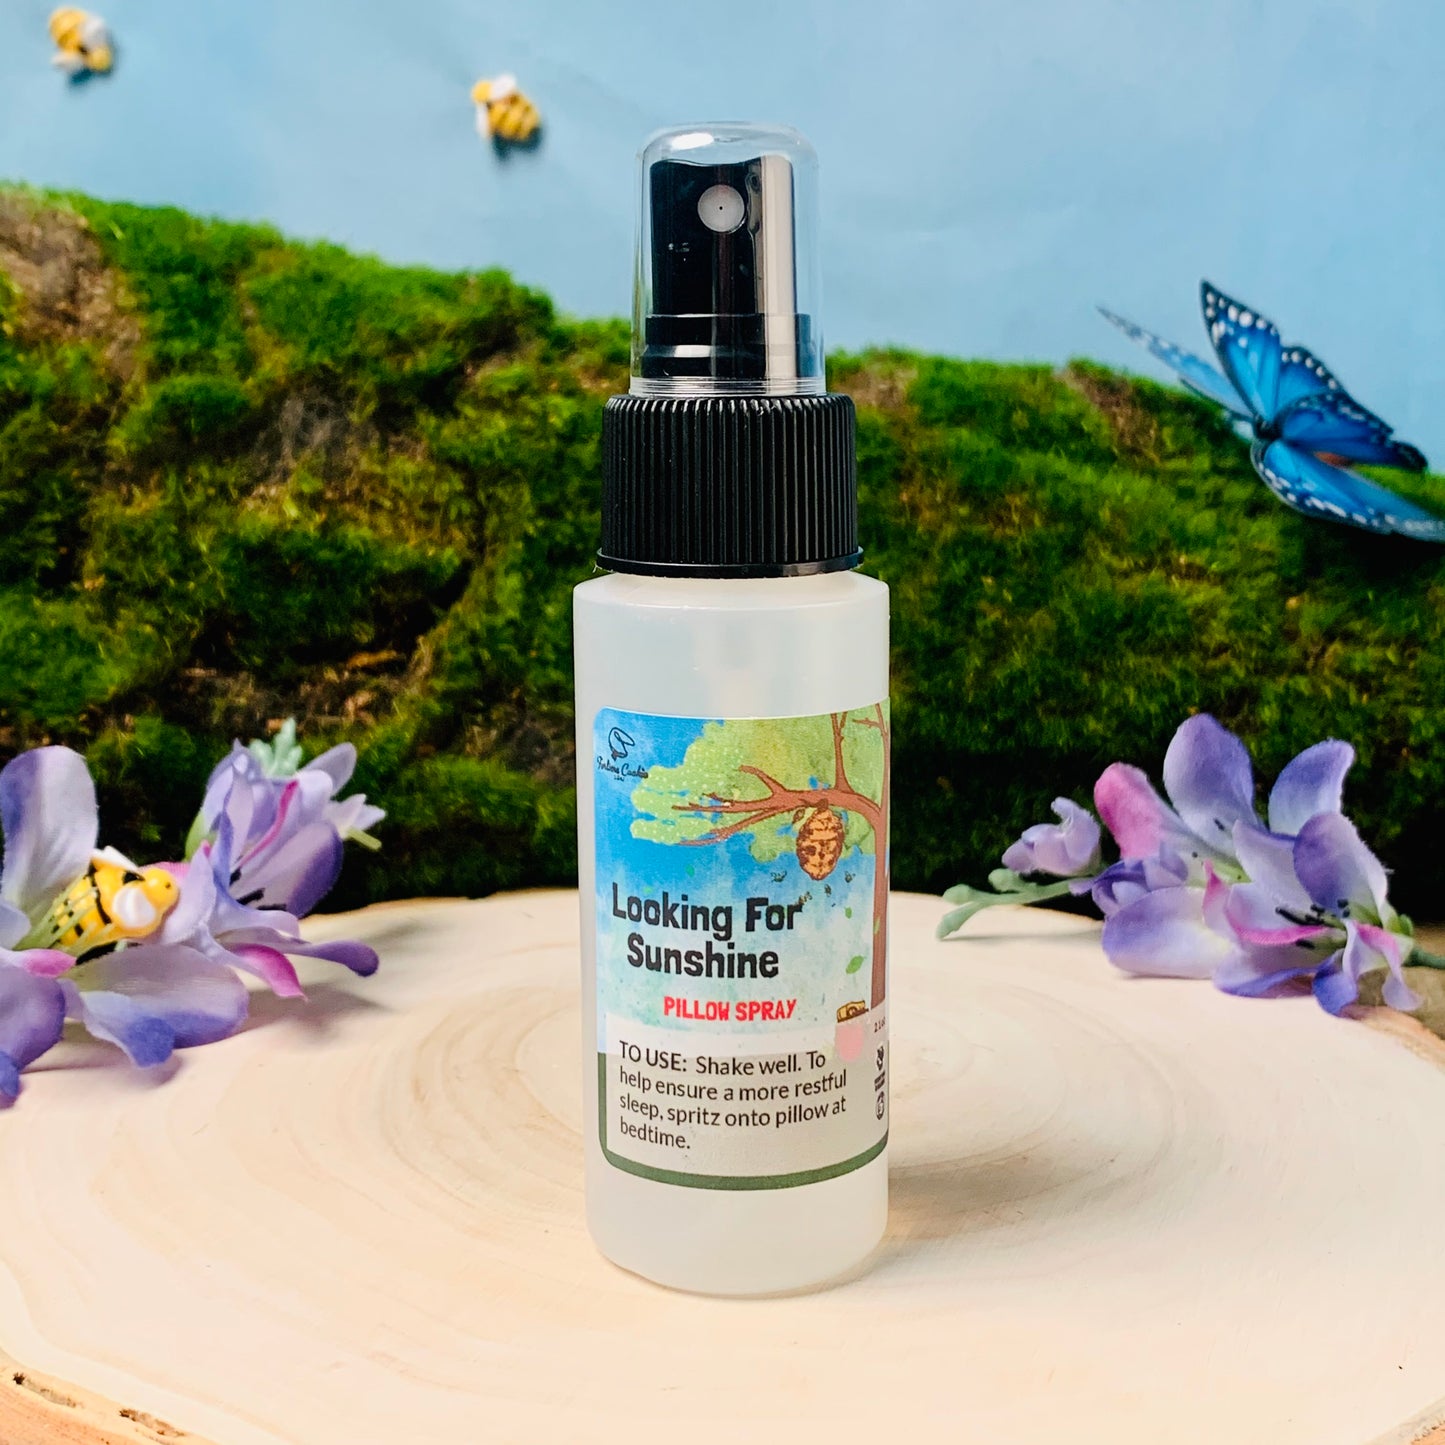 LOOKING FOR SUNSHINE Pillow Spray